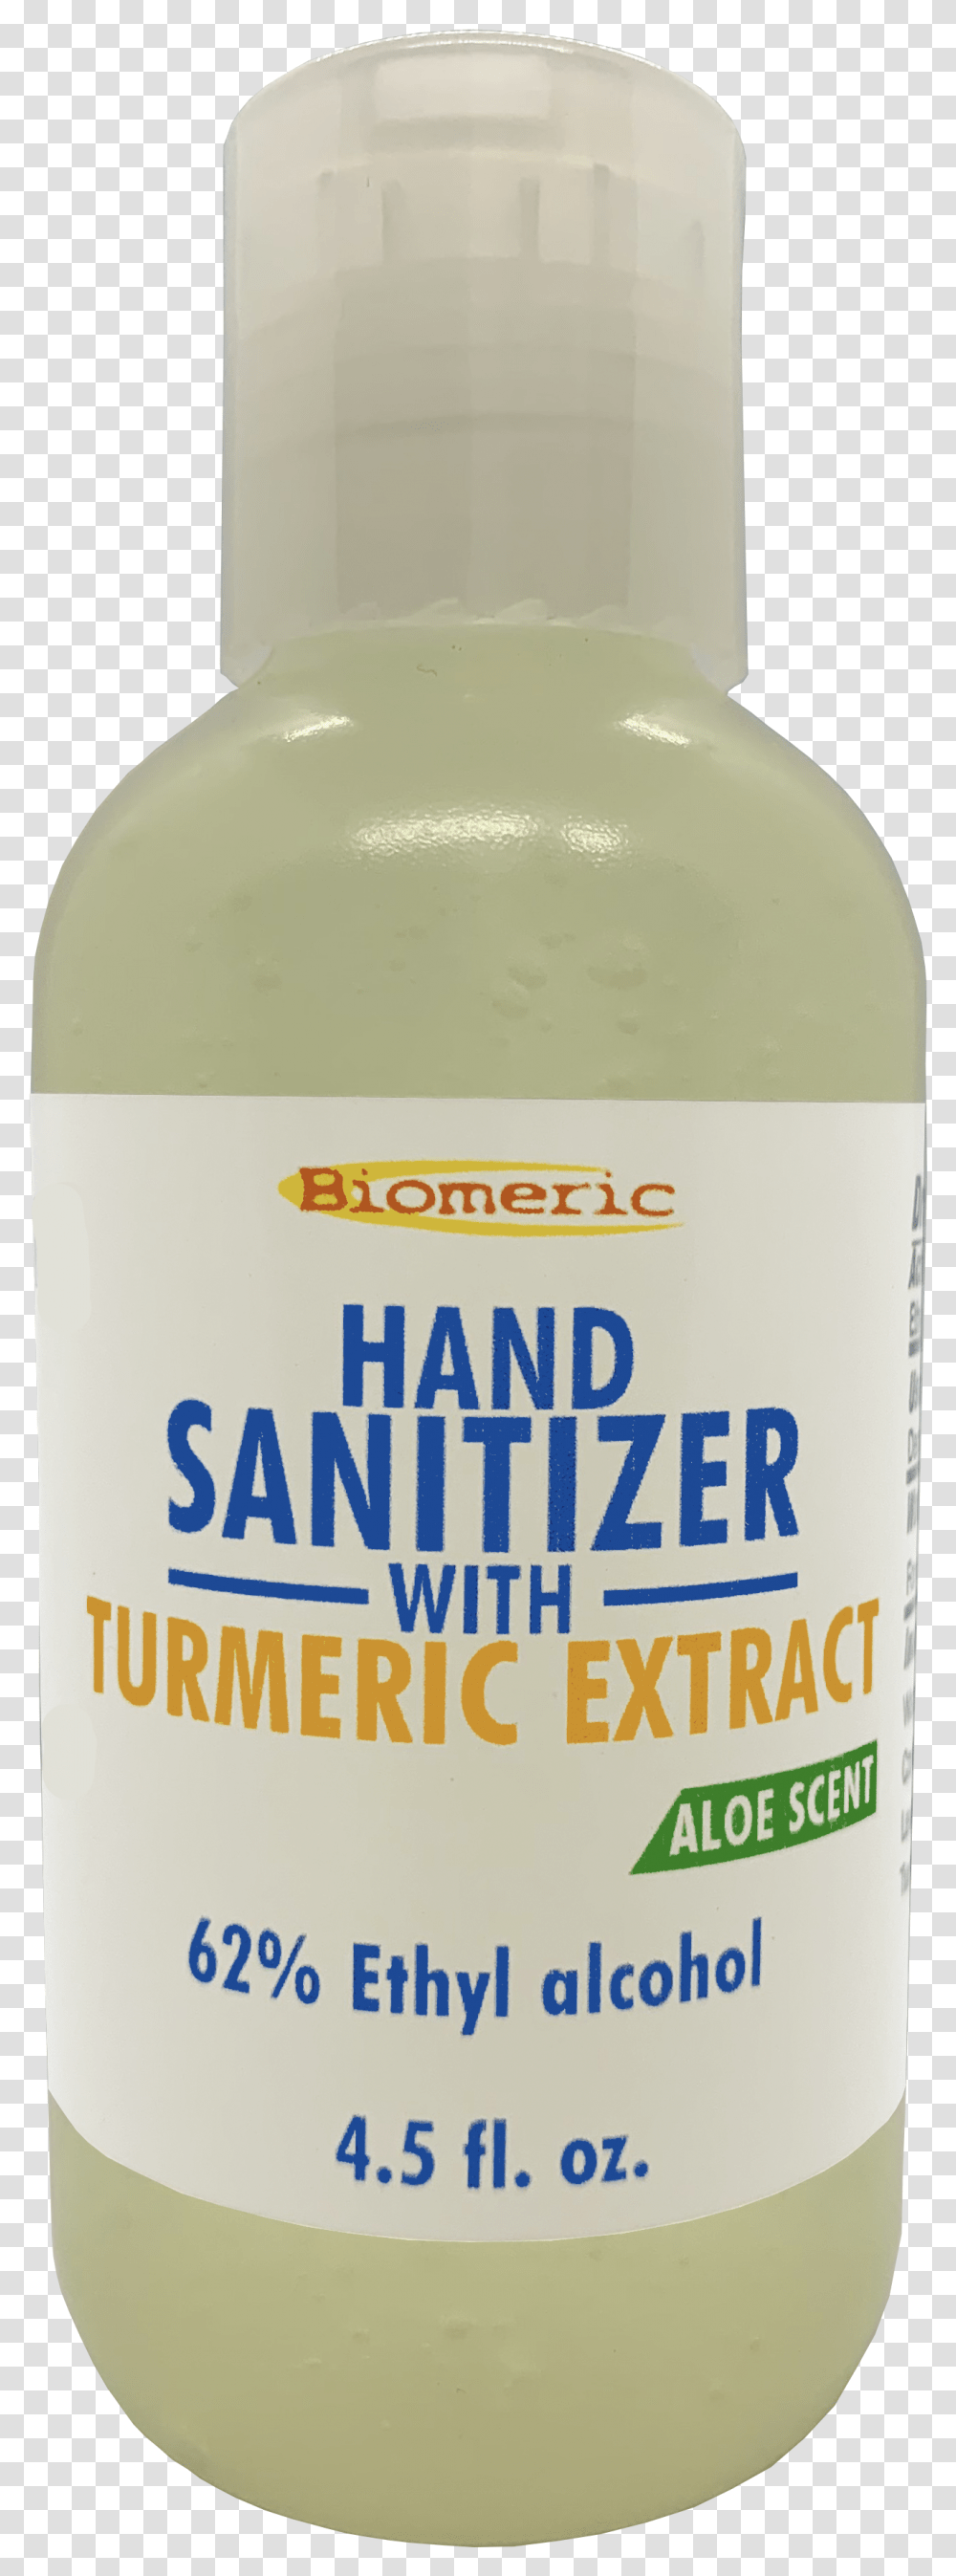 Hand Sanitizer With Turmeric Extract Skin Care, Milk, Beverage, Alcohol, Liquor Transparent Png